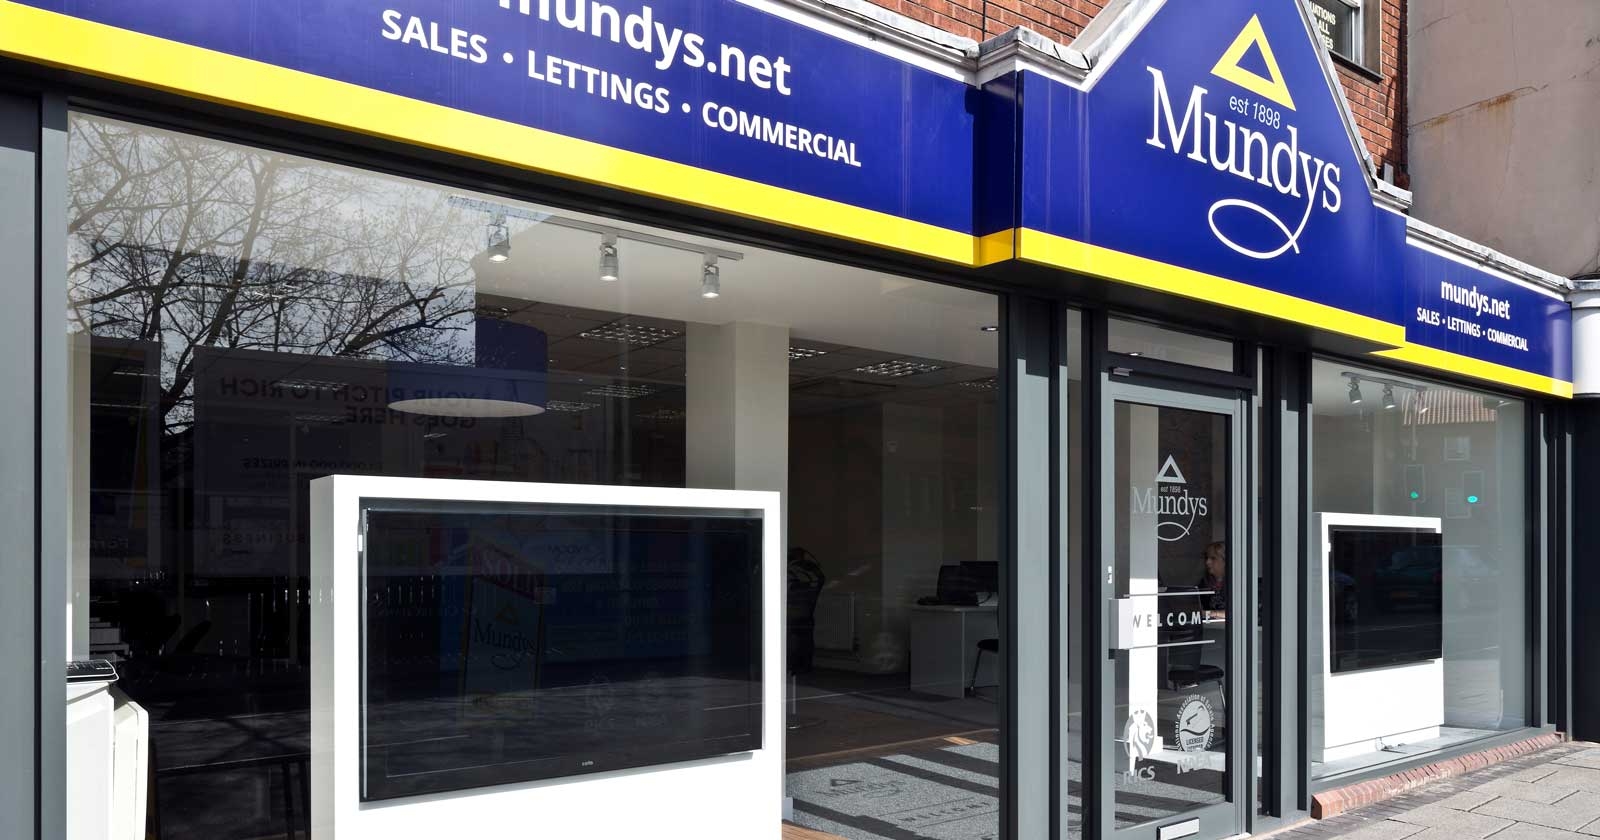 Mundys external signage installed by APSS